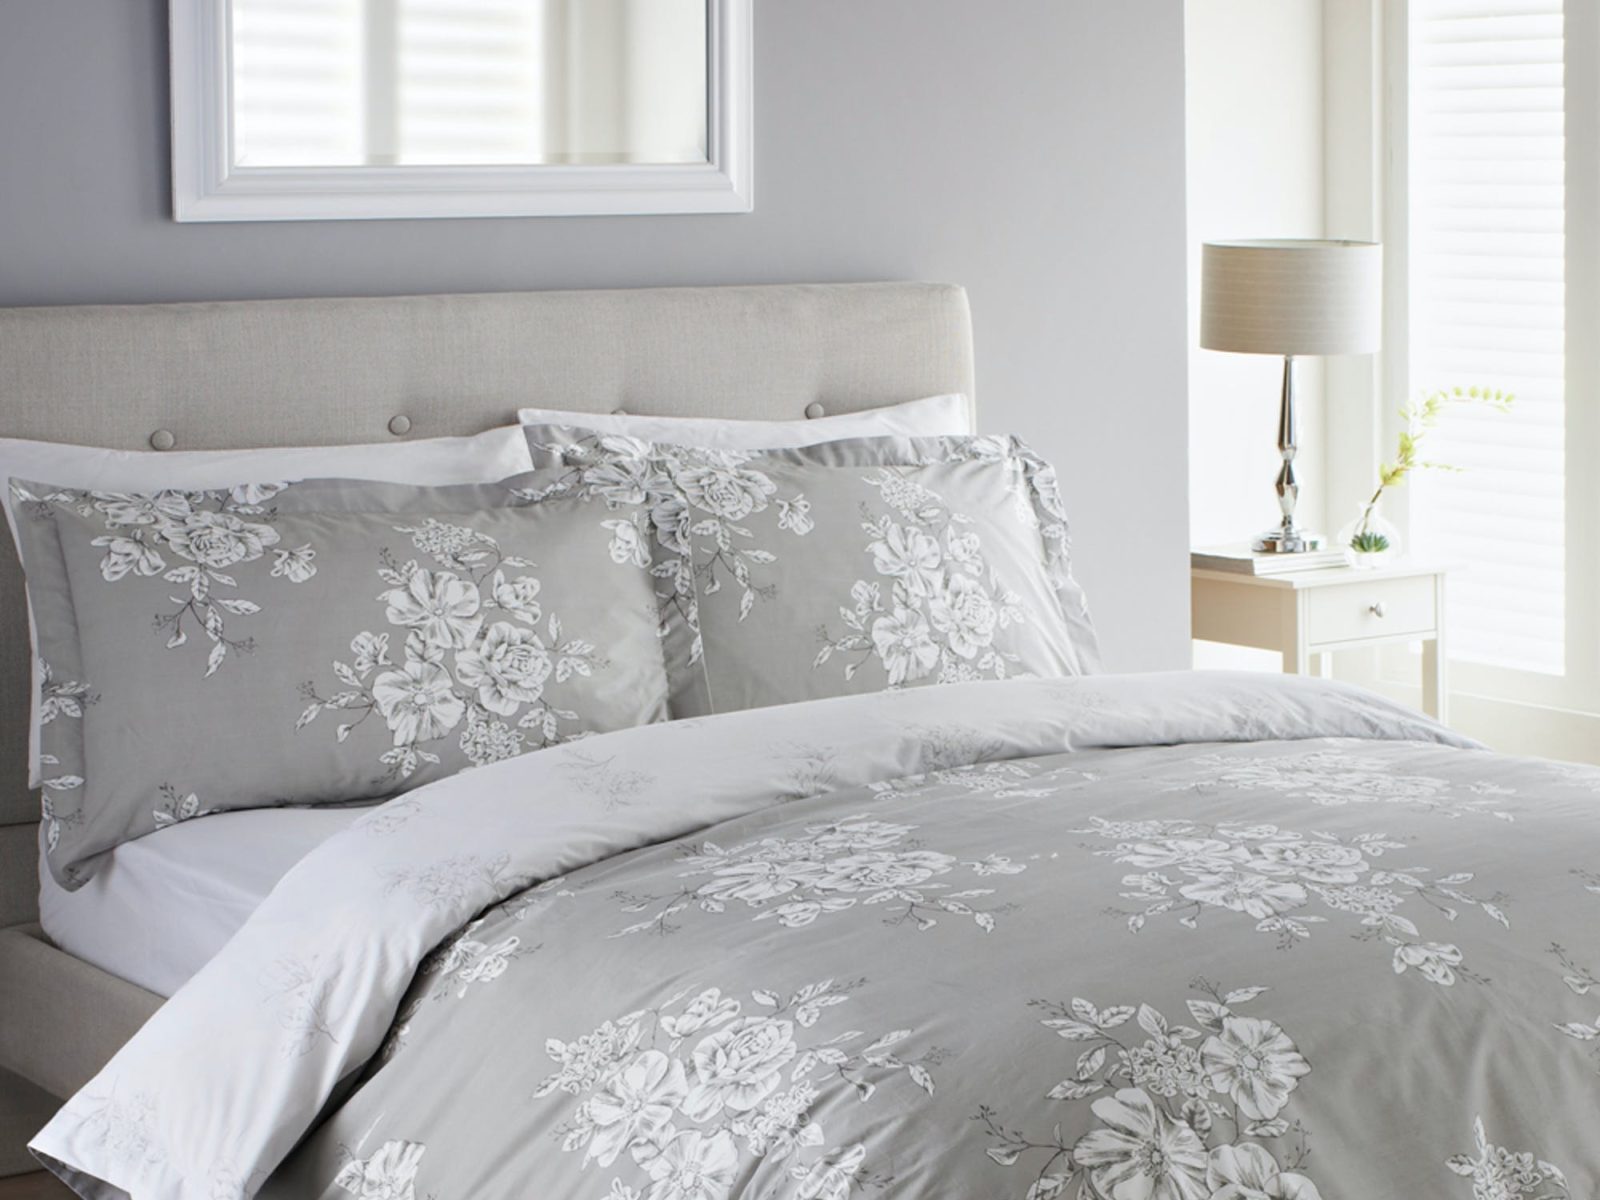 Classic Floral Duvet Cover - £20.00 to £30.00